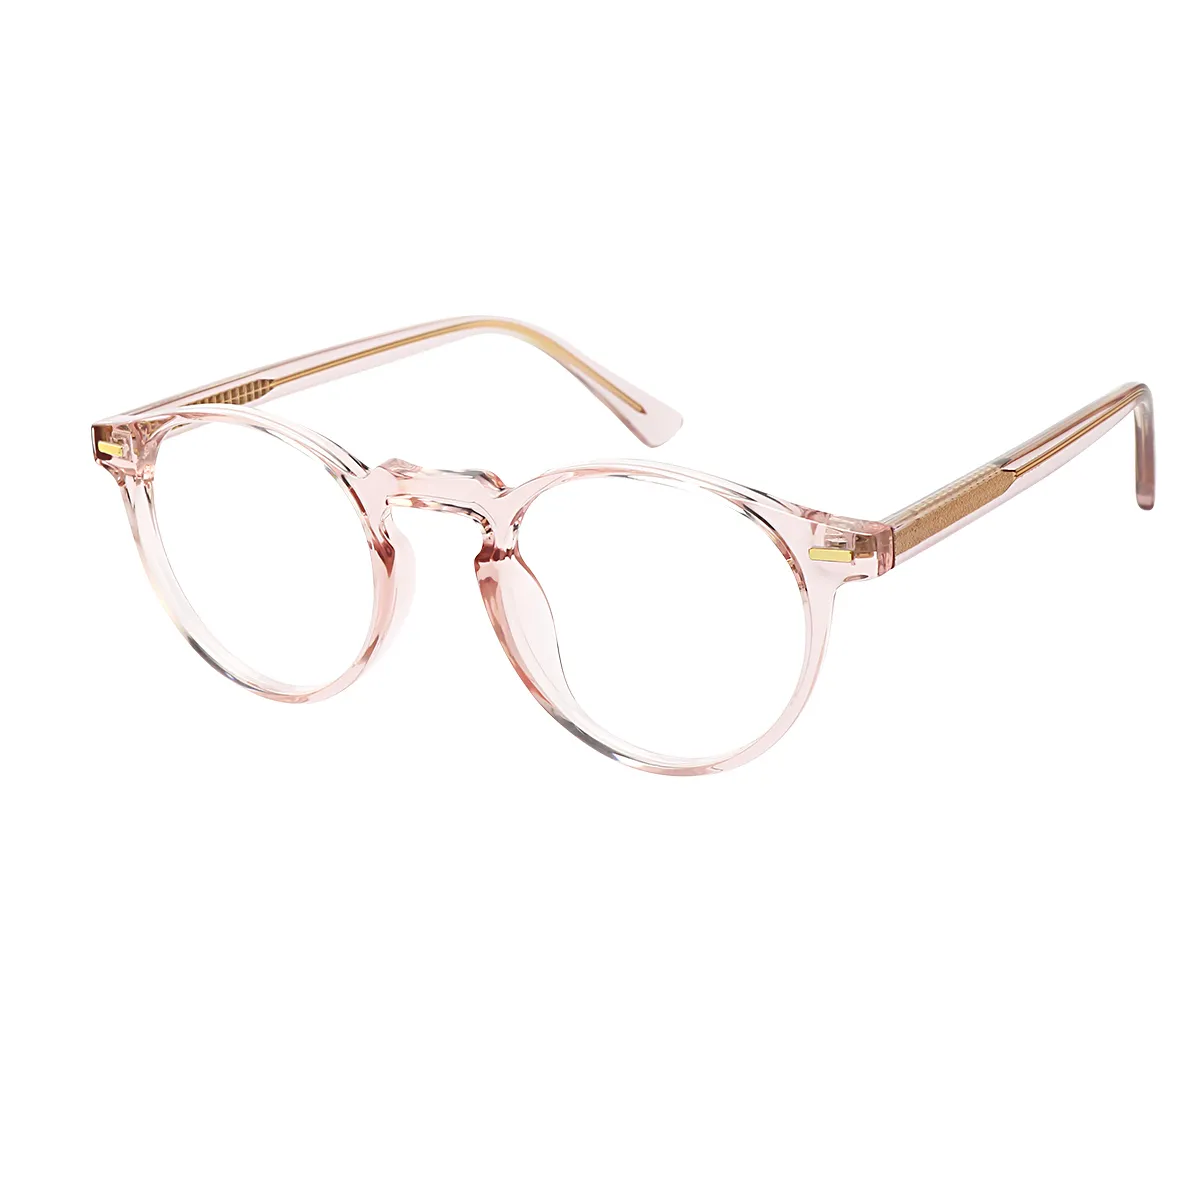 Chilling - Round Pink-Transparent Glasses for Women - EFE